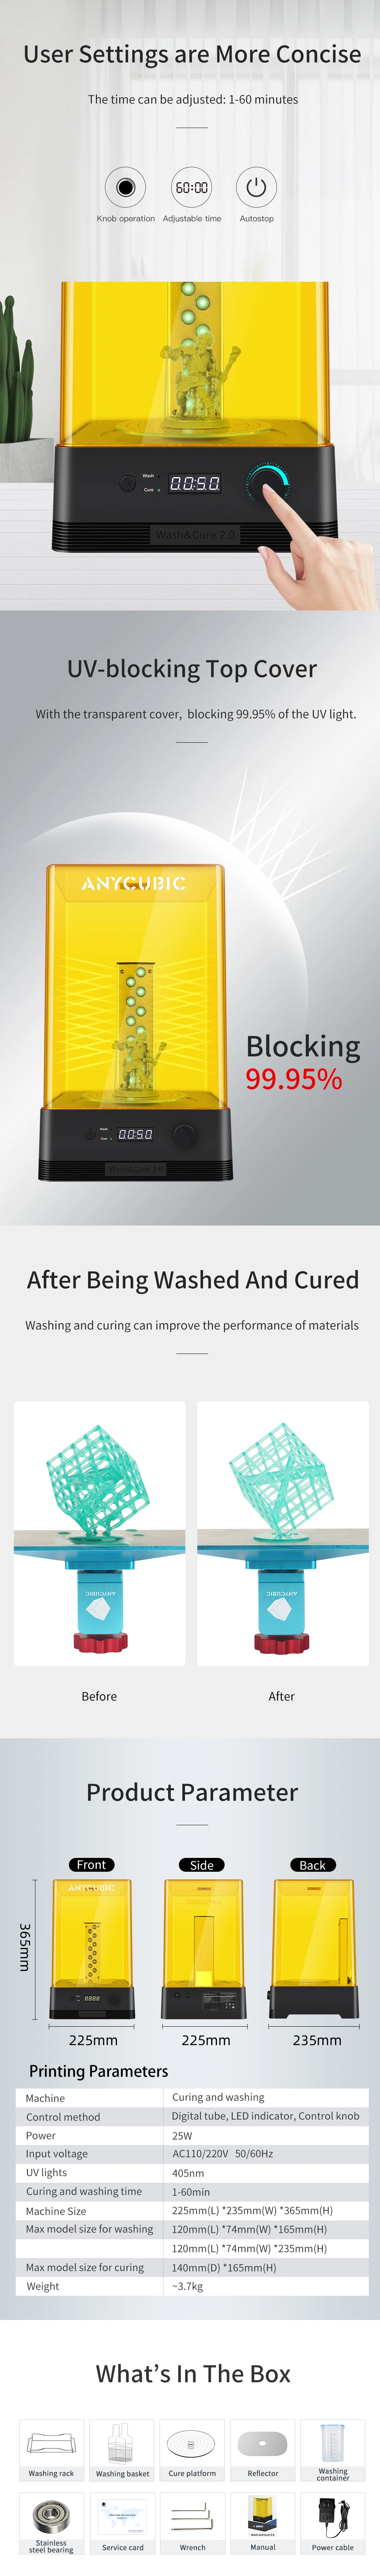 Wash & Cure Container Wash & Cure 2.0